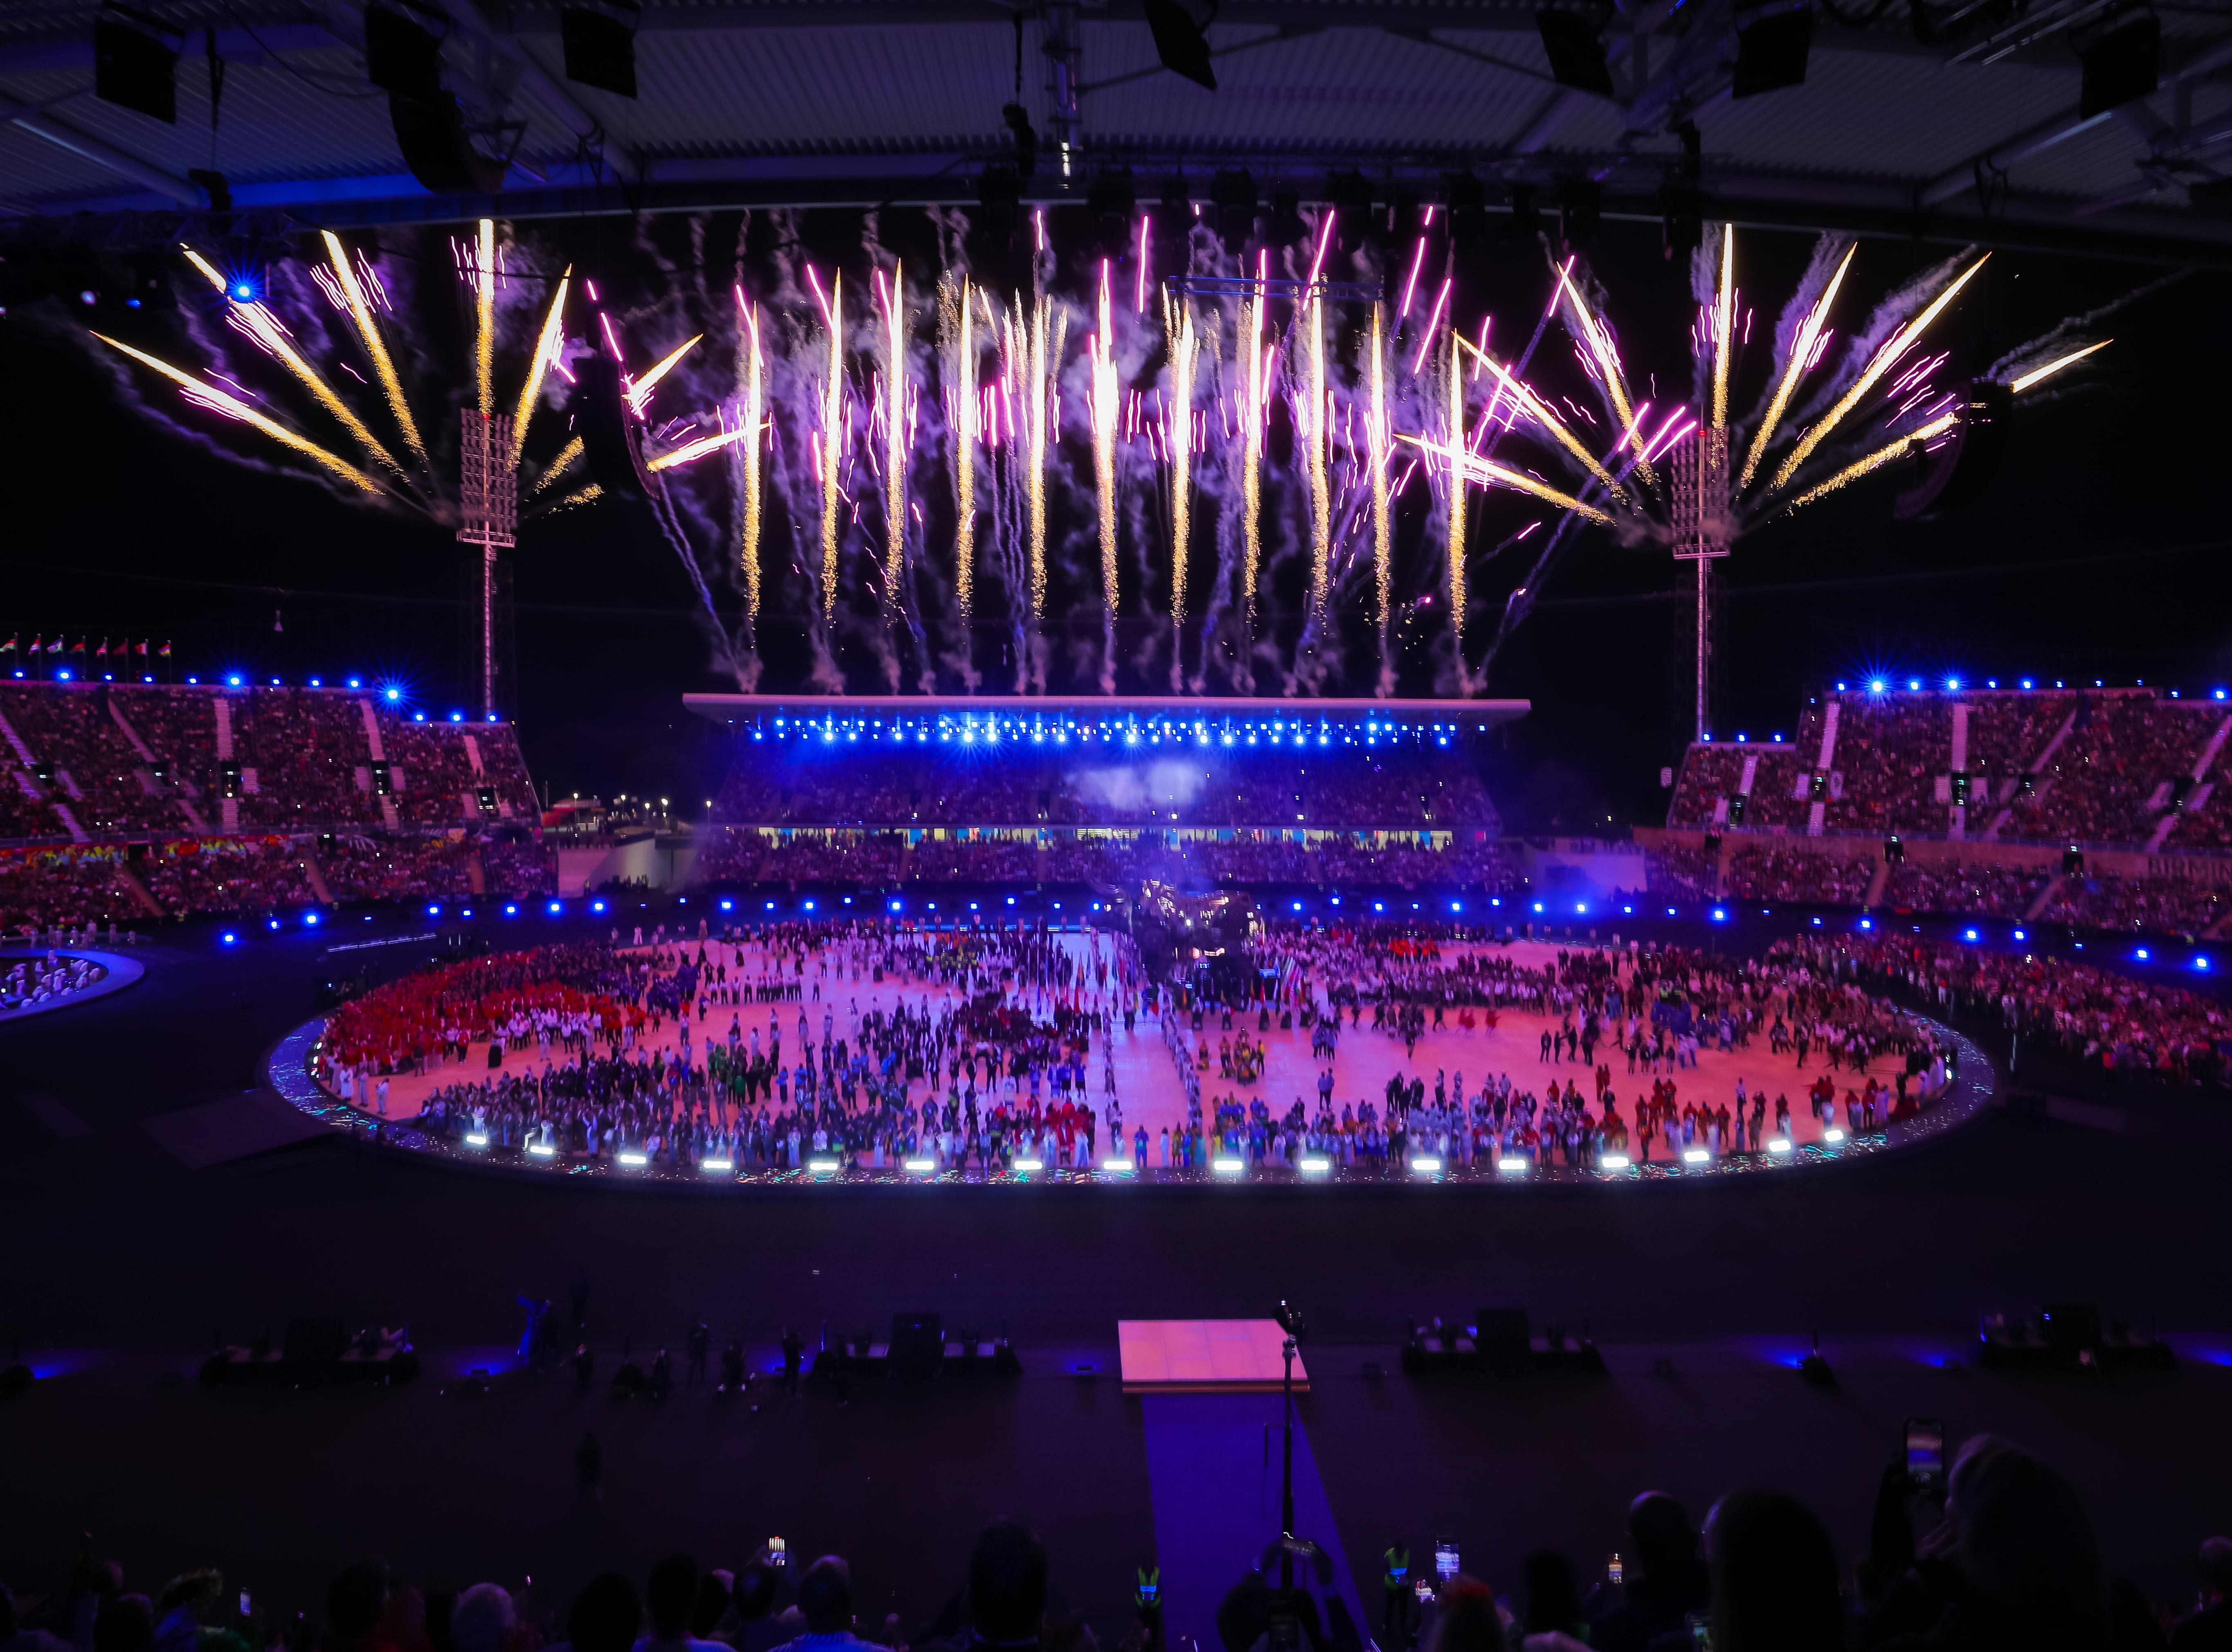 Singapore rules out hosting the 2026 Commonwealth Games